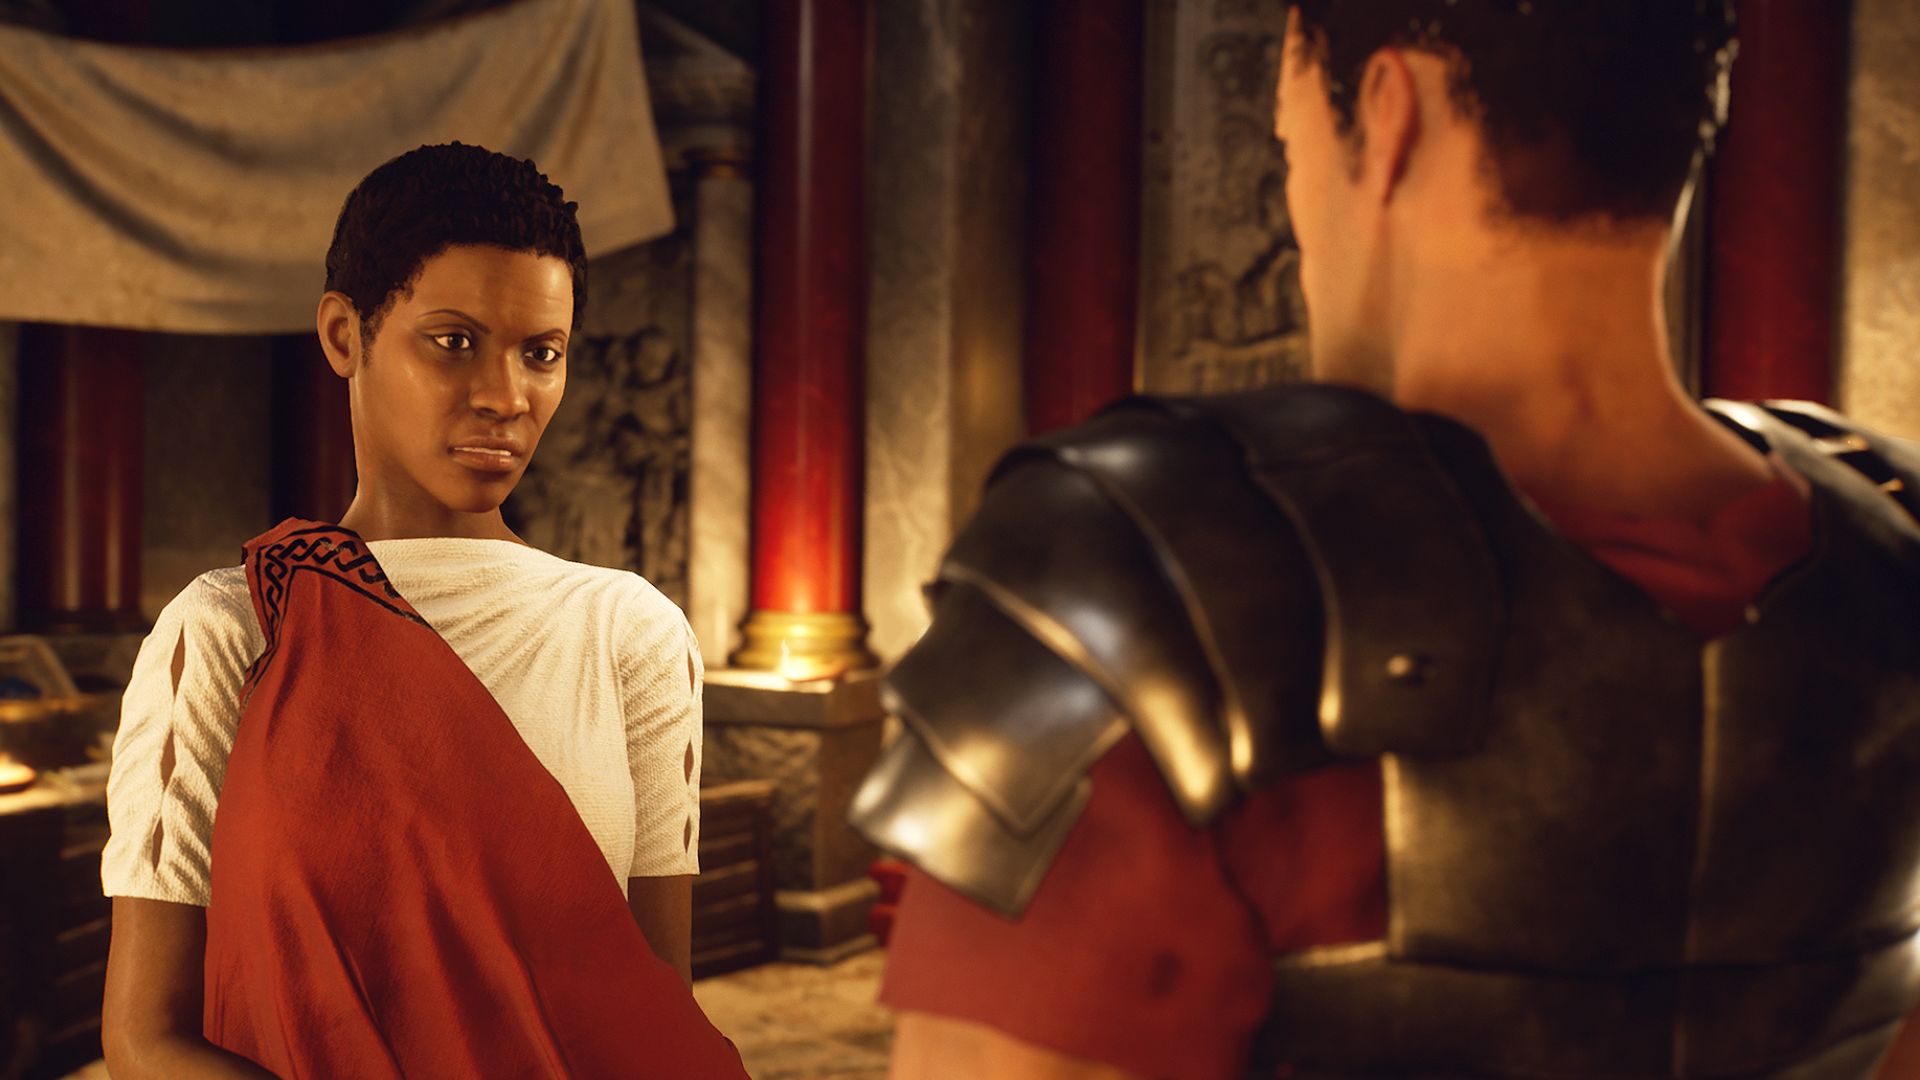 Best history games: Forgotten City. Image shows a boy in Roman robes.